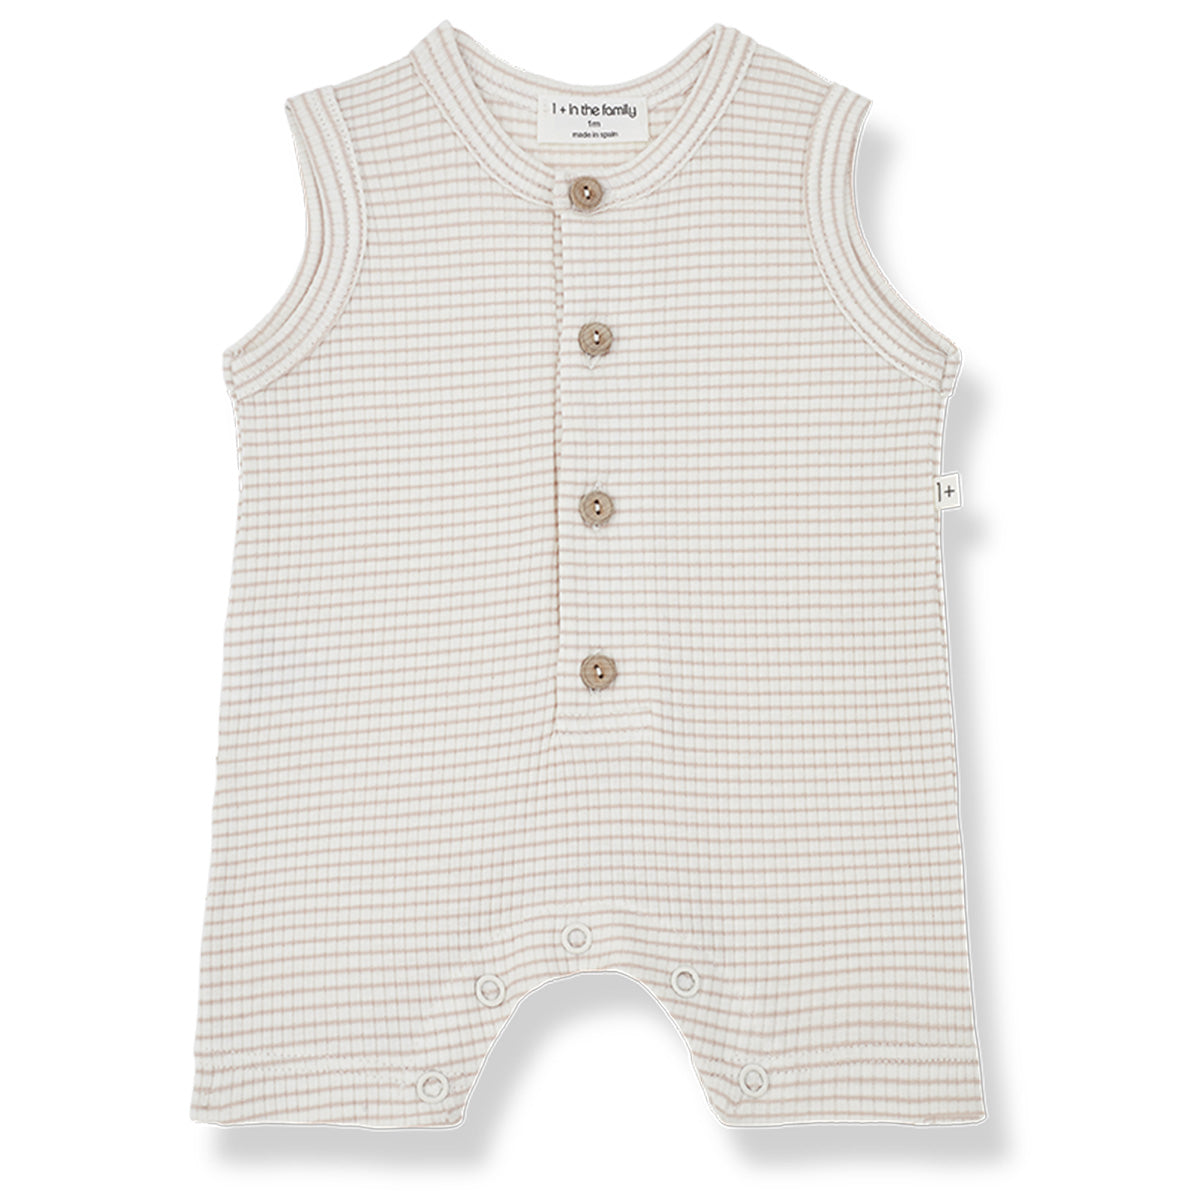 The Pino Romper from 1 + in the Family. The romper has a striped all-over print